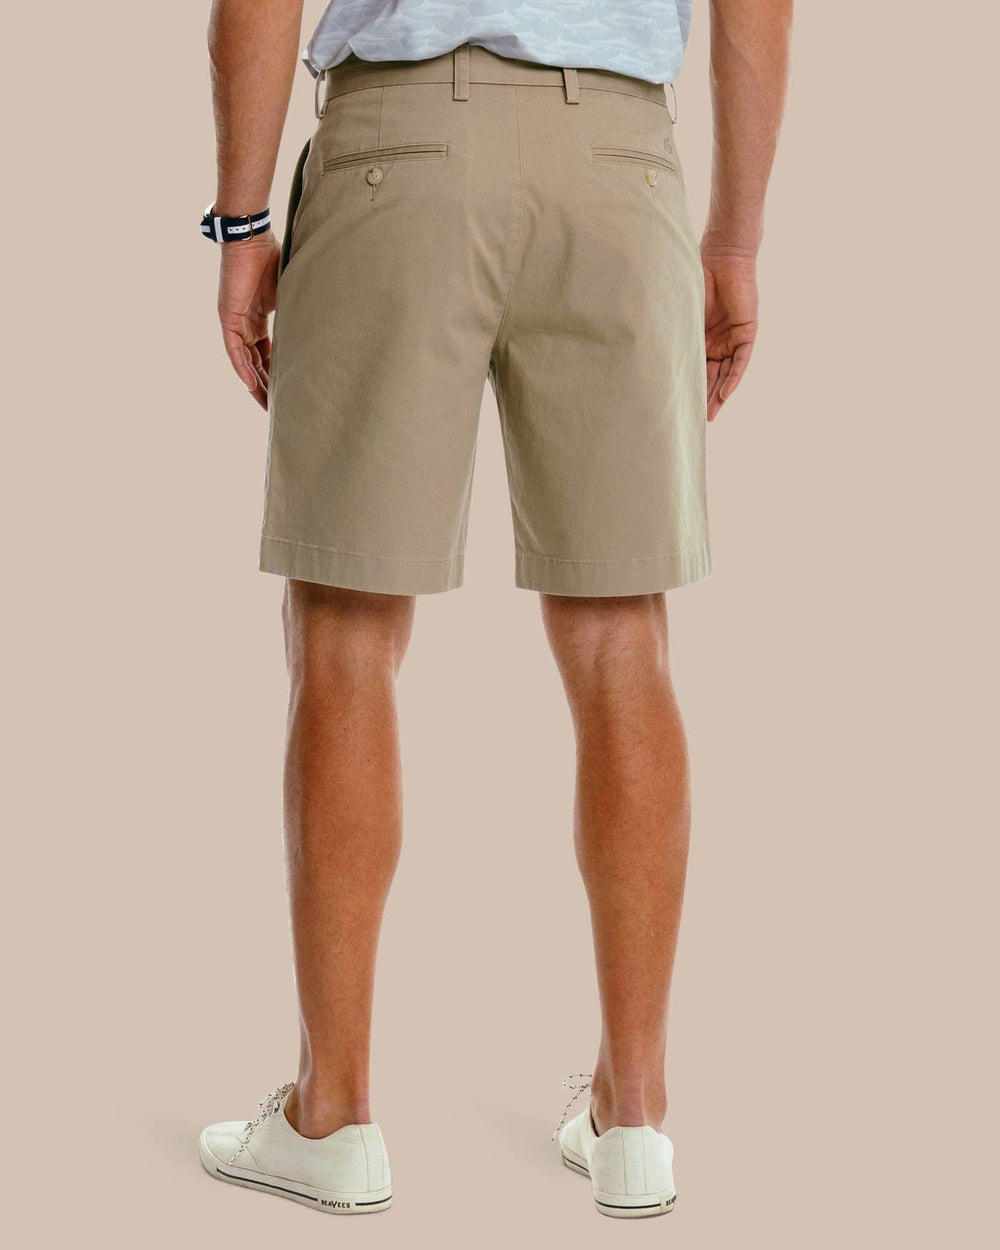 The back view of the Men's New Channel Marker 9 Inch Short by Southern Tide - Sandstone Khaki